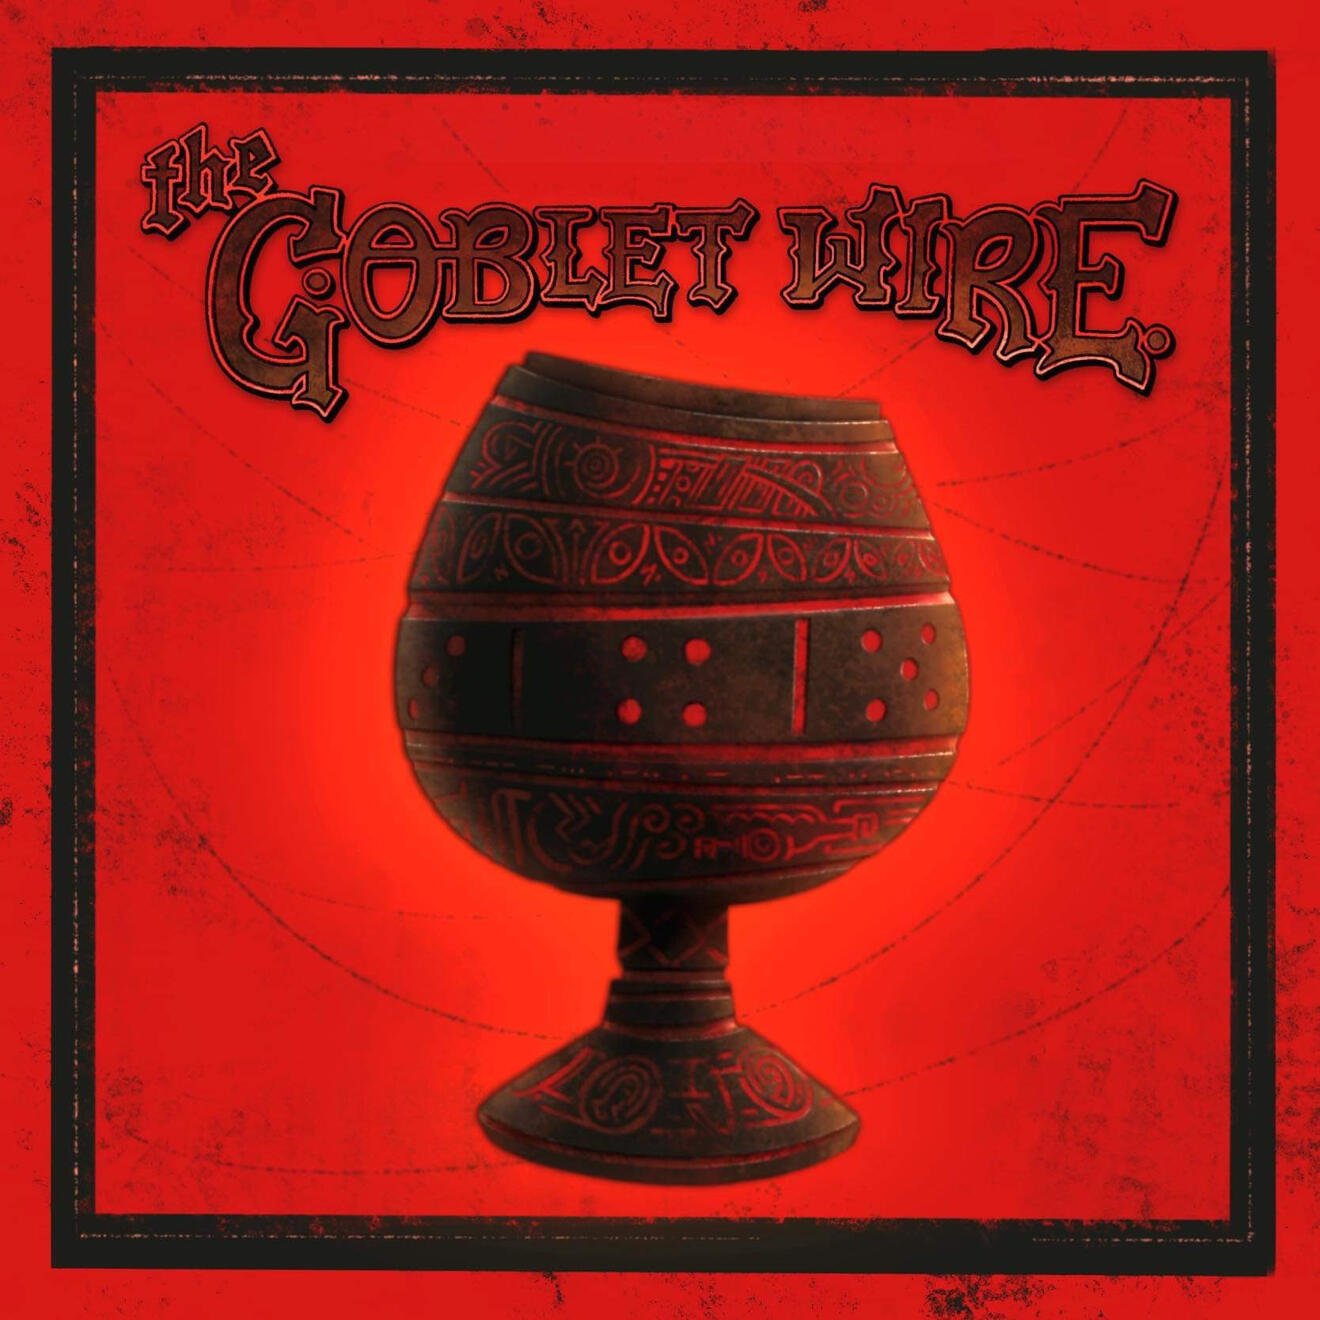 The Goblet Wire podcast